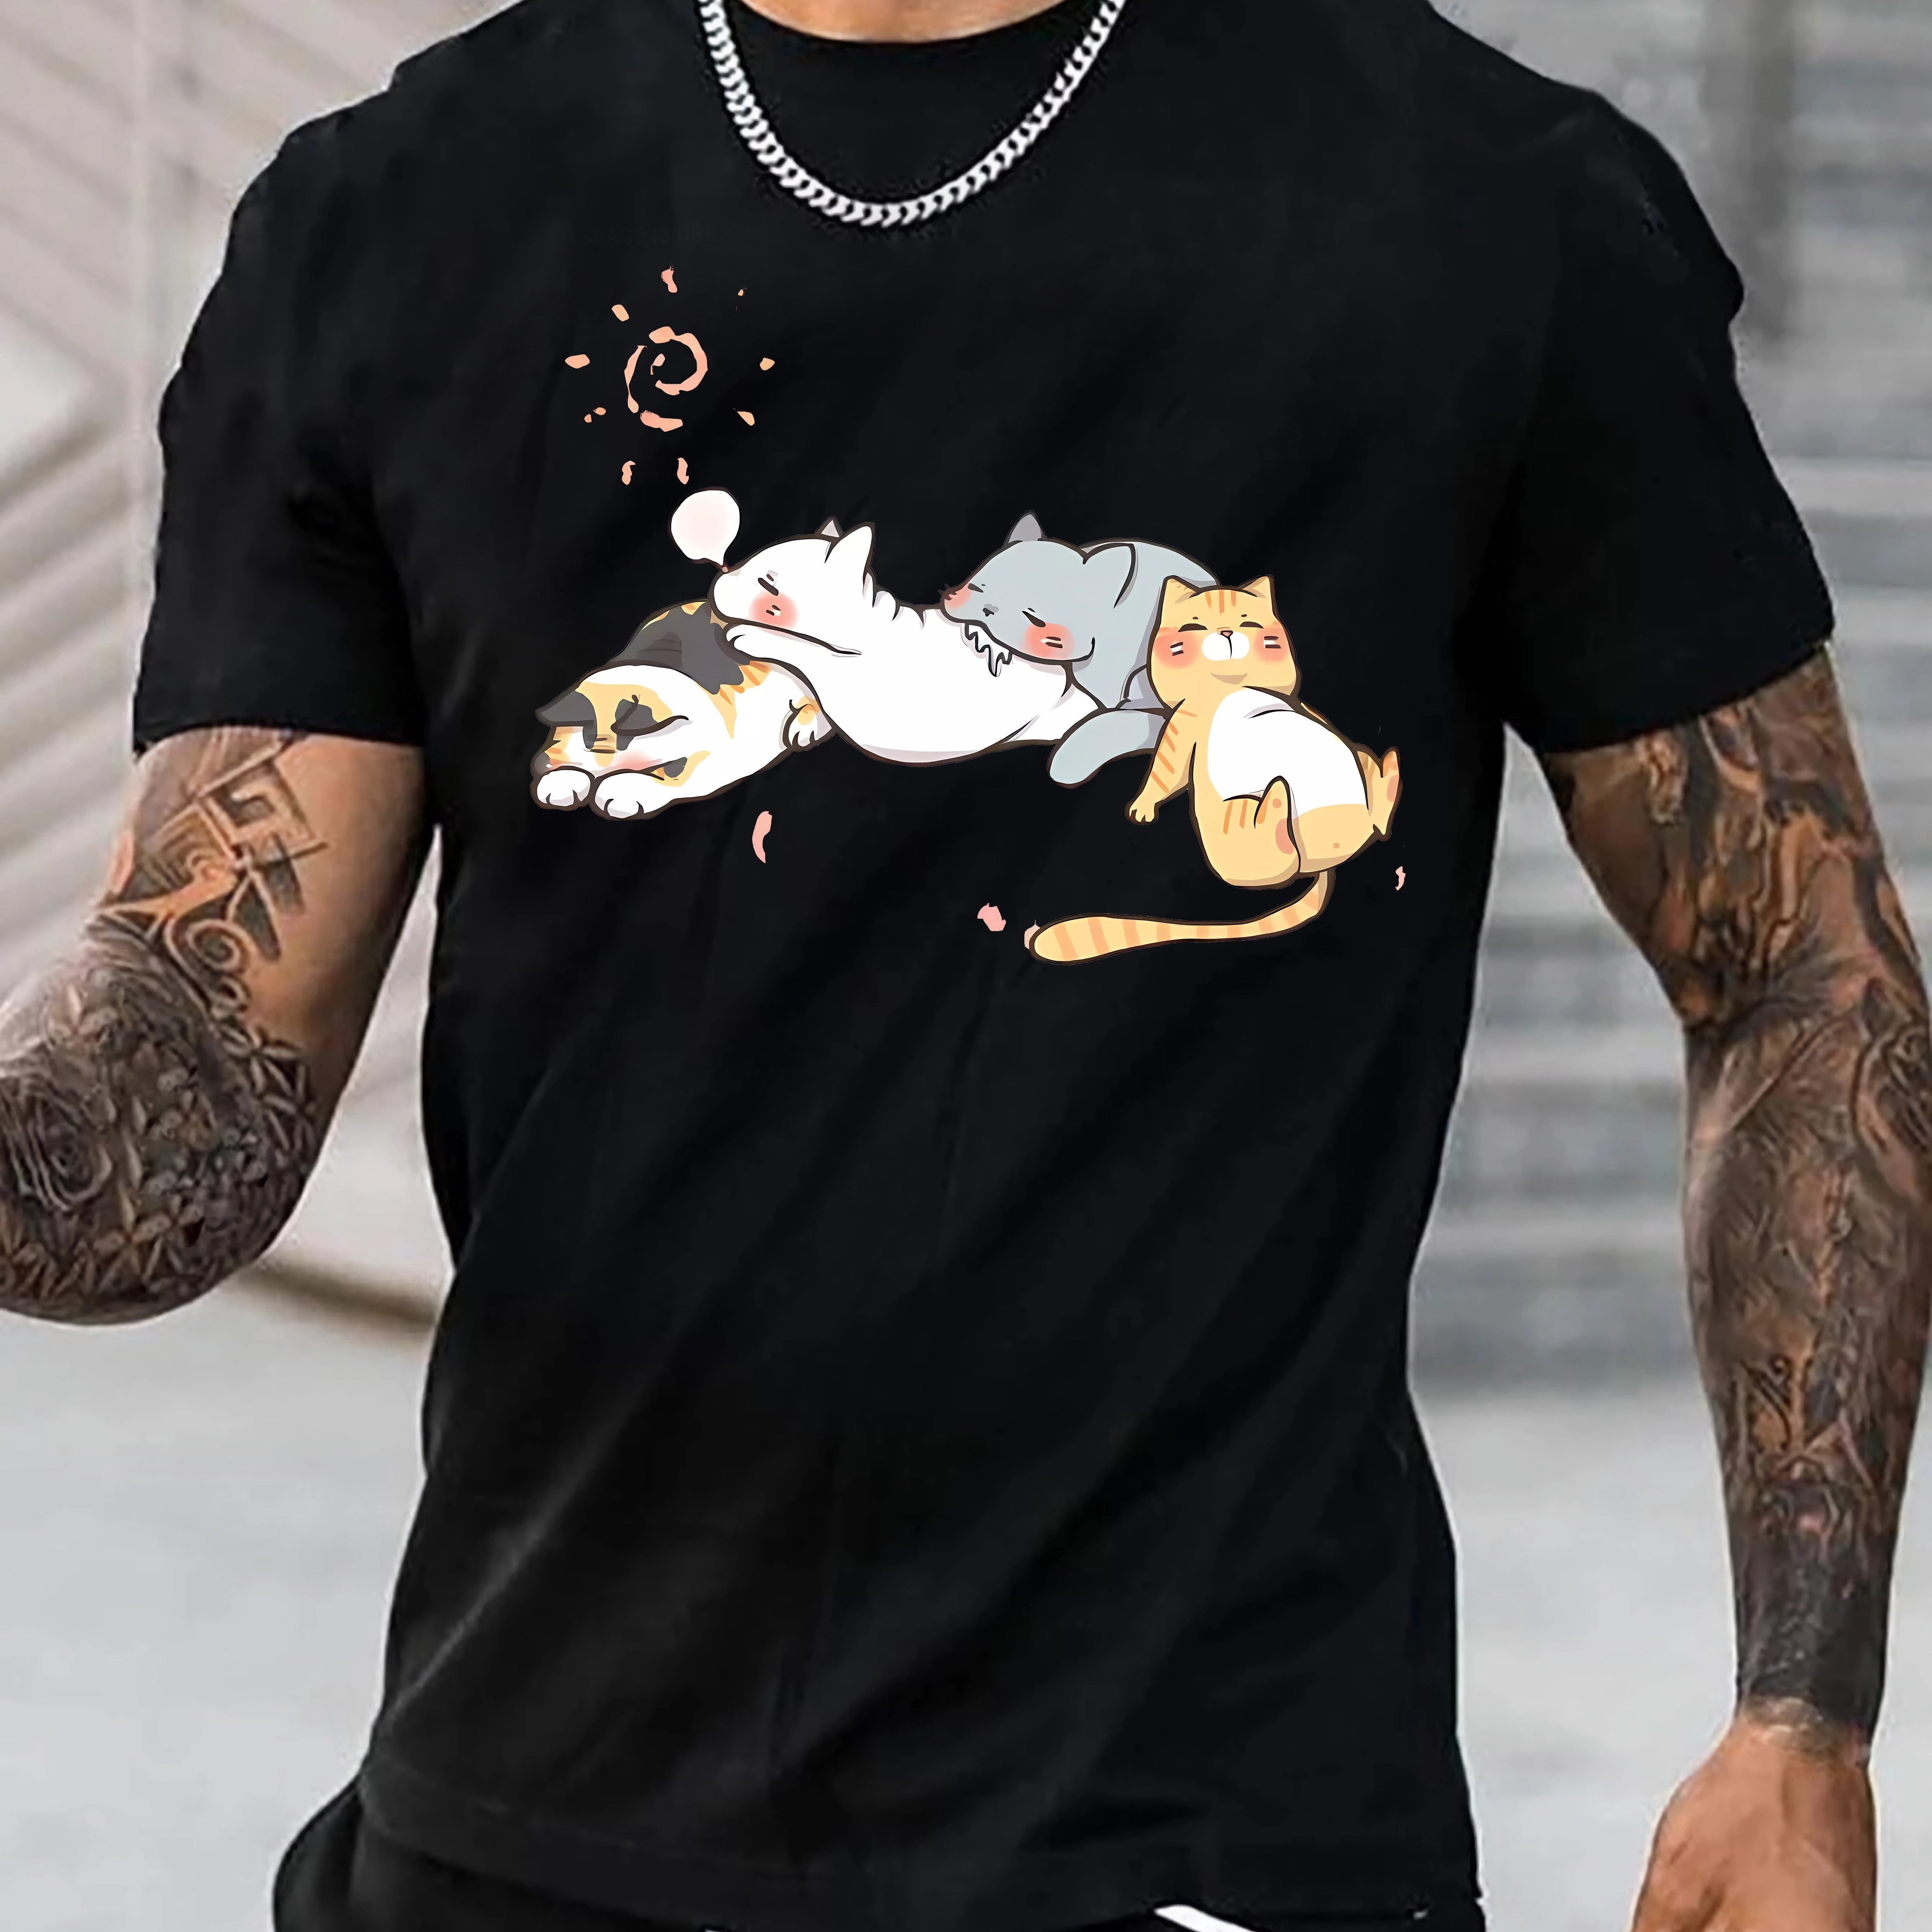 

Cute Cats Napping Print Tee Shirt, Tee For Men, Casual Short Sleeve T-shirt For Summer Spring Fall, Tops As Gifts